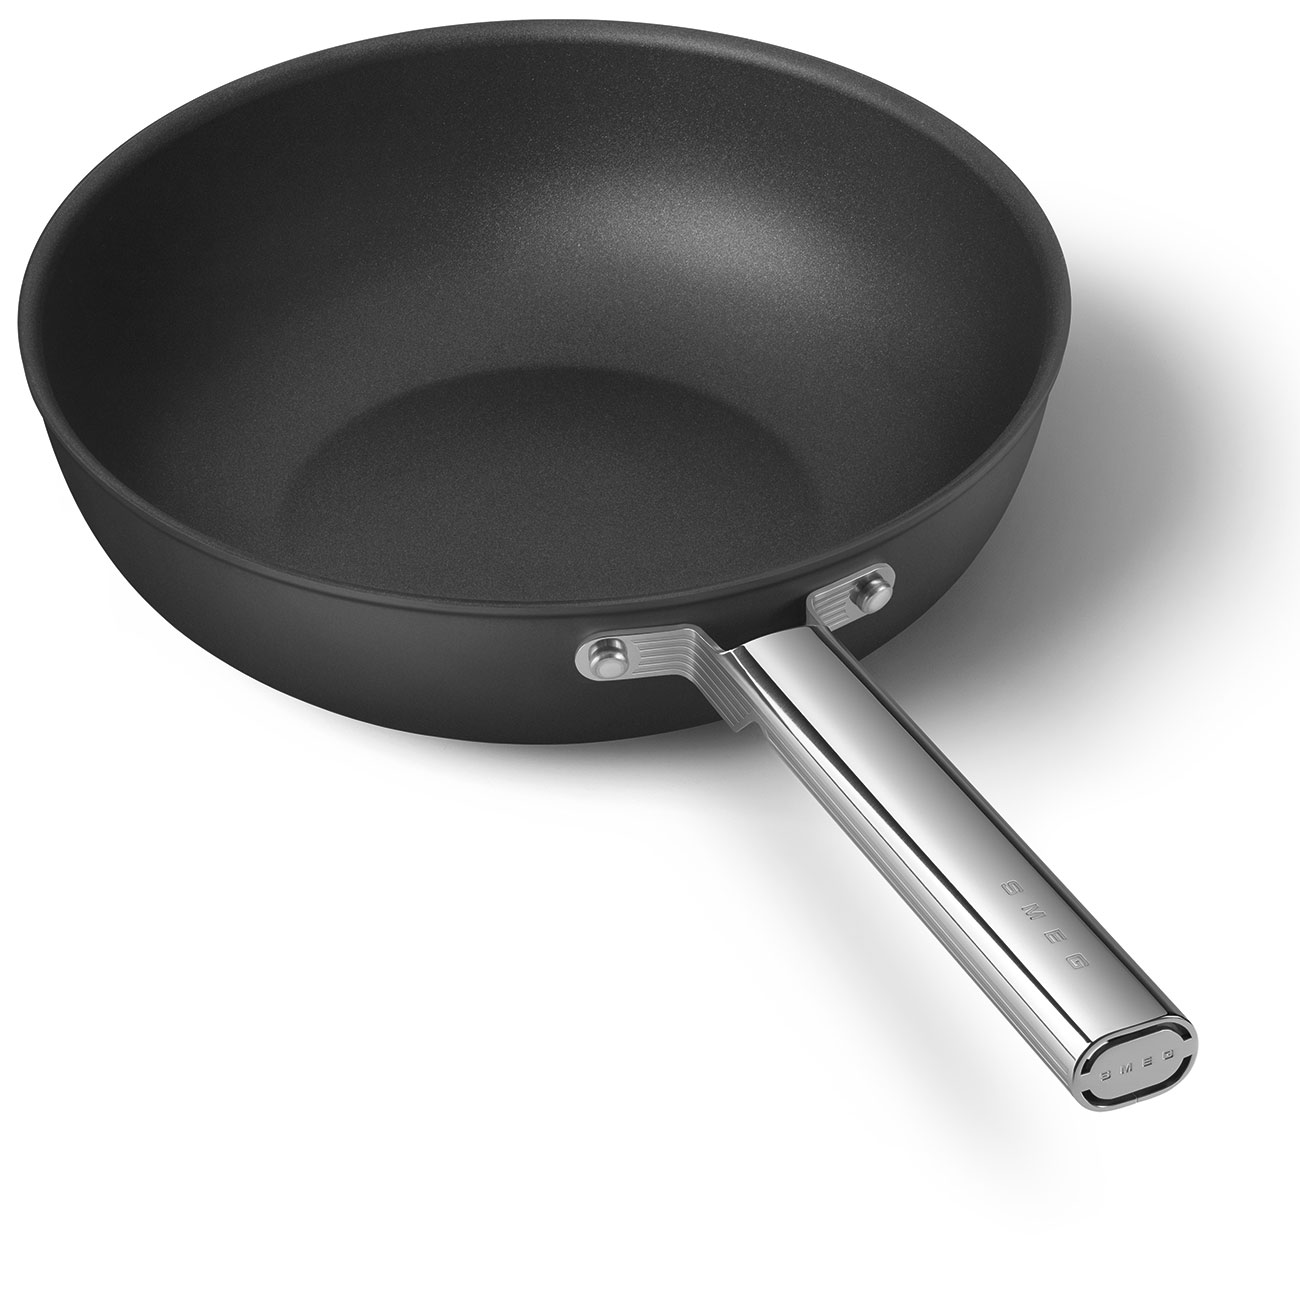 Smeg Black Non-stick Wok with Stainless Steel Handle - CKFW3001BLM_8